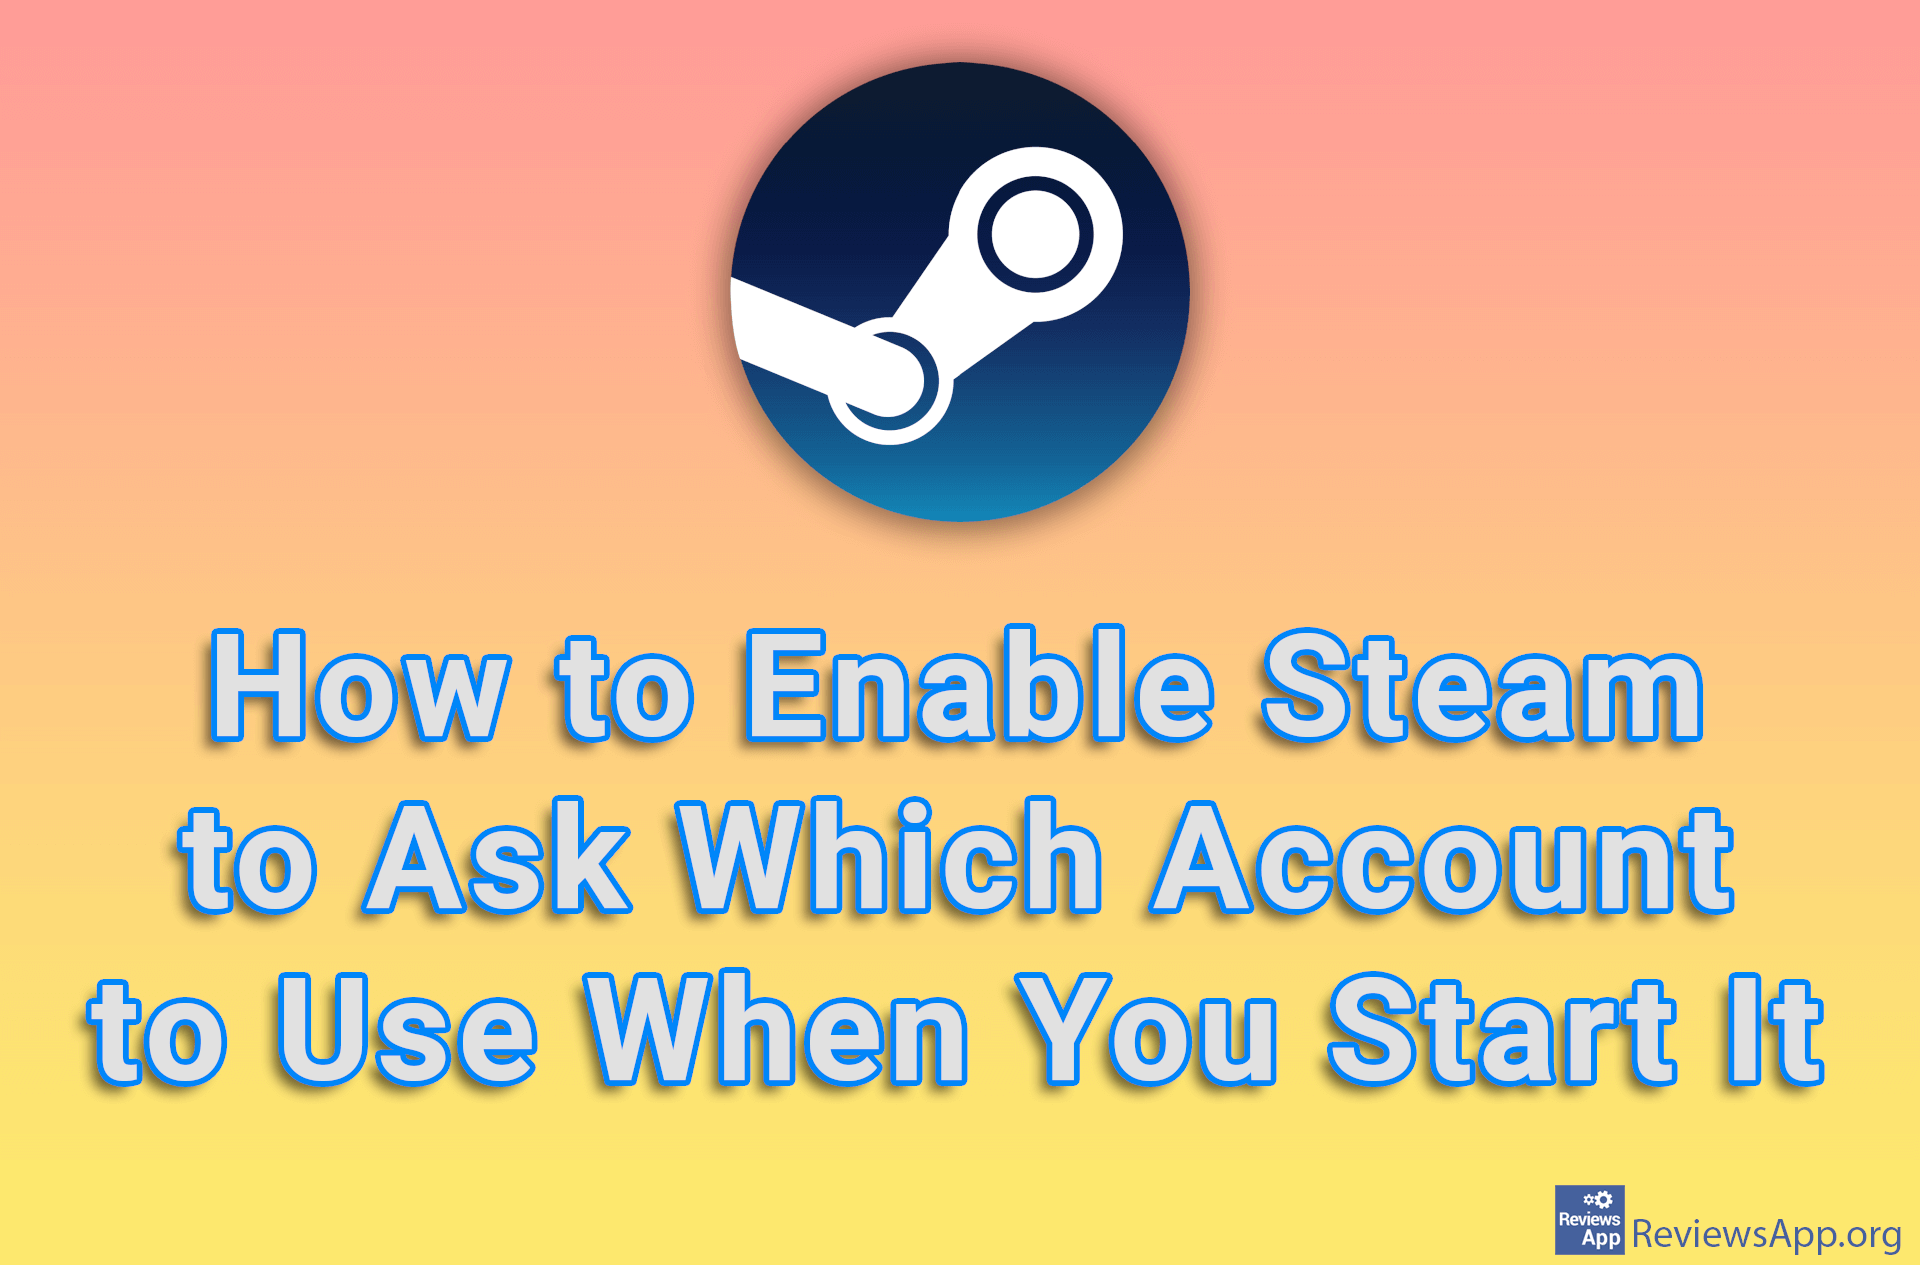 How to Enable Steam to Ask Which Account to Use When You Start It